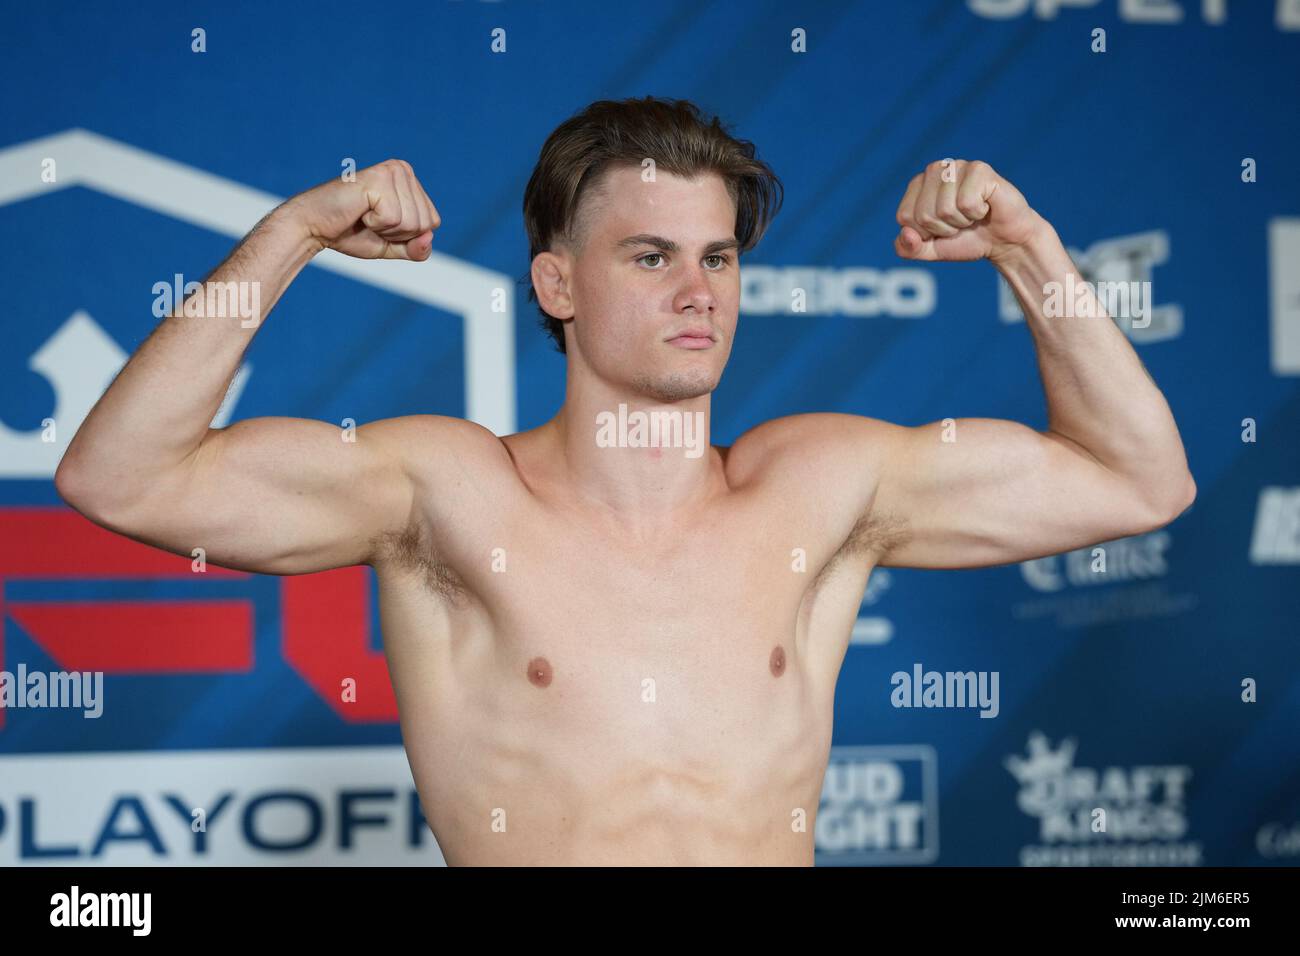 NEW YORK CITY, NY - August 4: Alexei Pergande steps on the scale for the official weigh-ins at The New Yorker Hotel for 2022 PFL Playoffs Semi-Finals : Official Weigh-ins on August 4, 2022 in New York City, NY, United States. (Photo by Louis Grasse/PxImages) Stock Photo